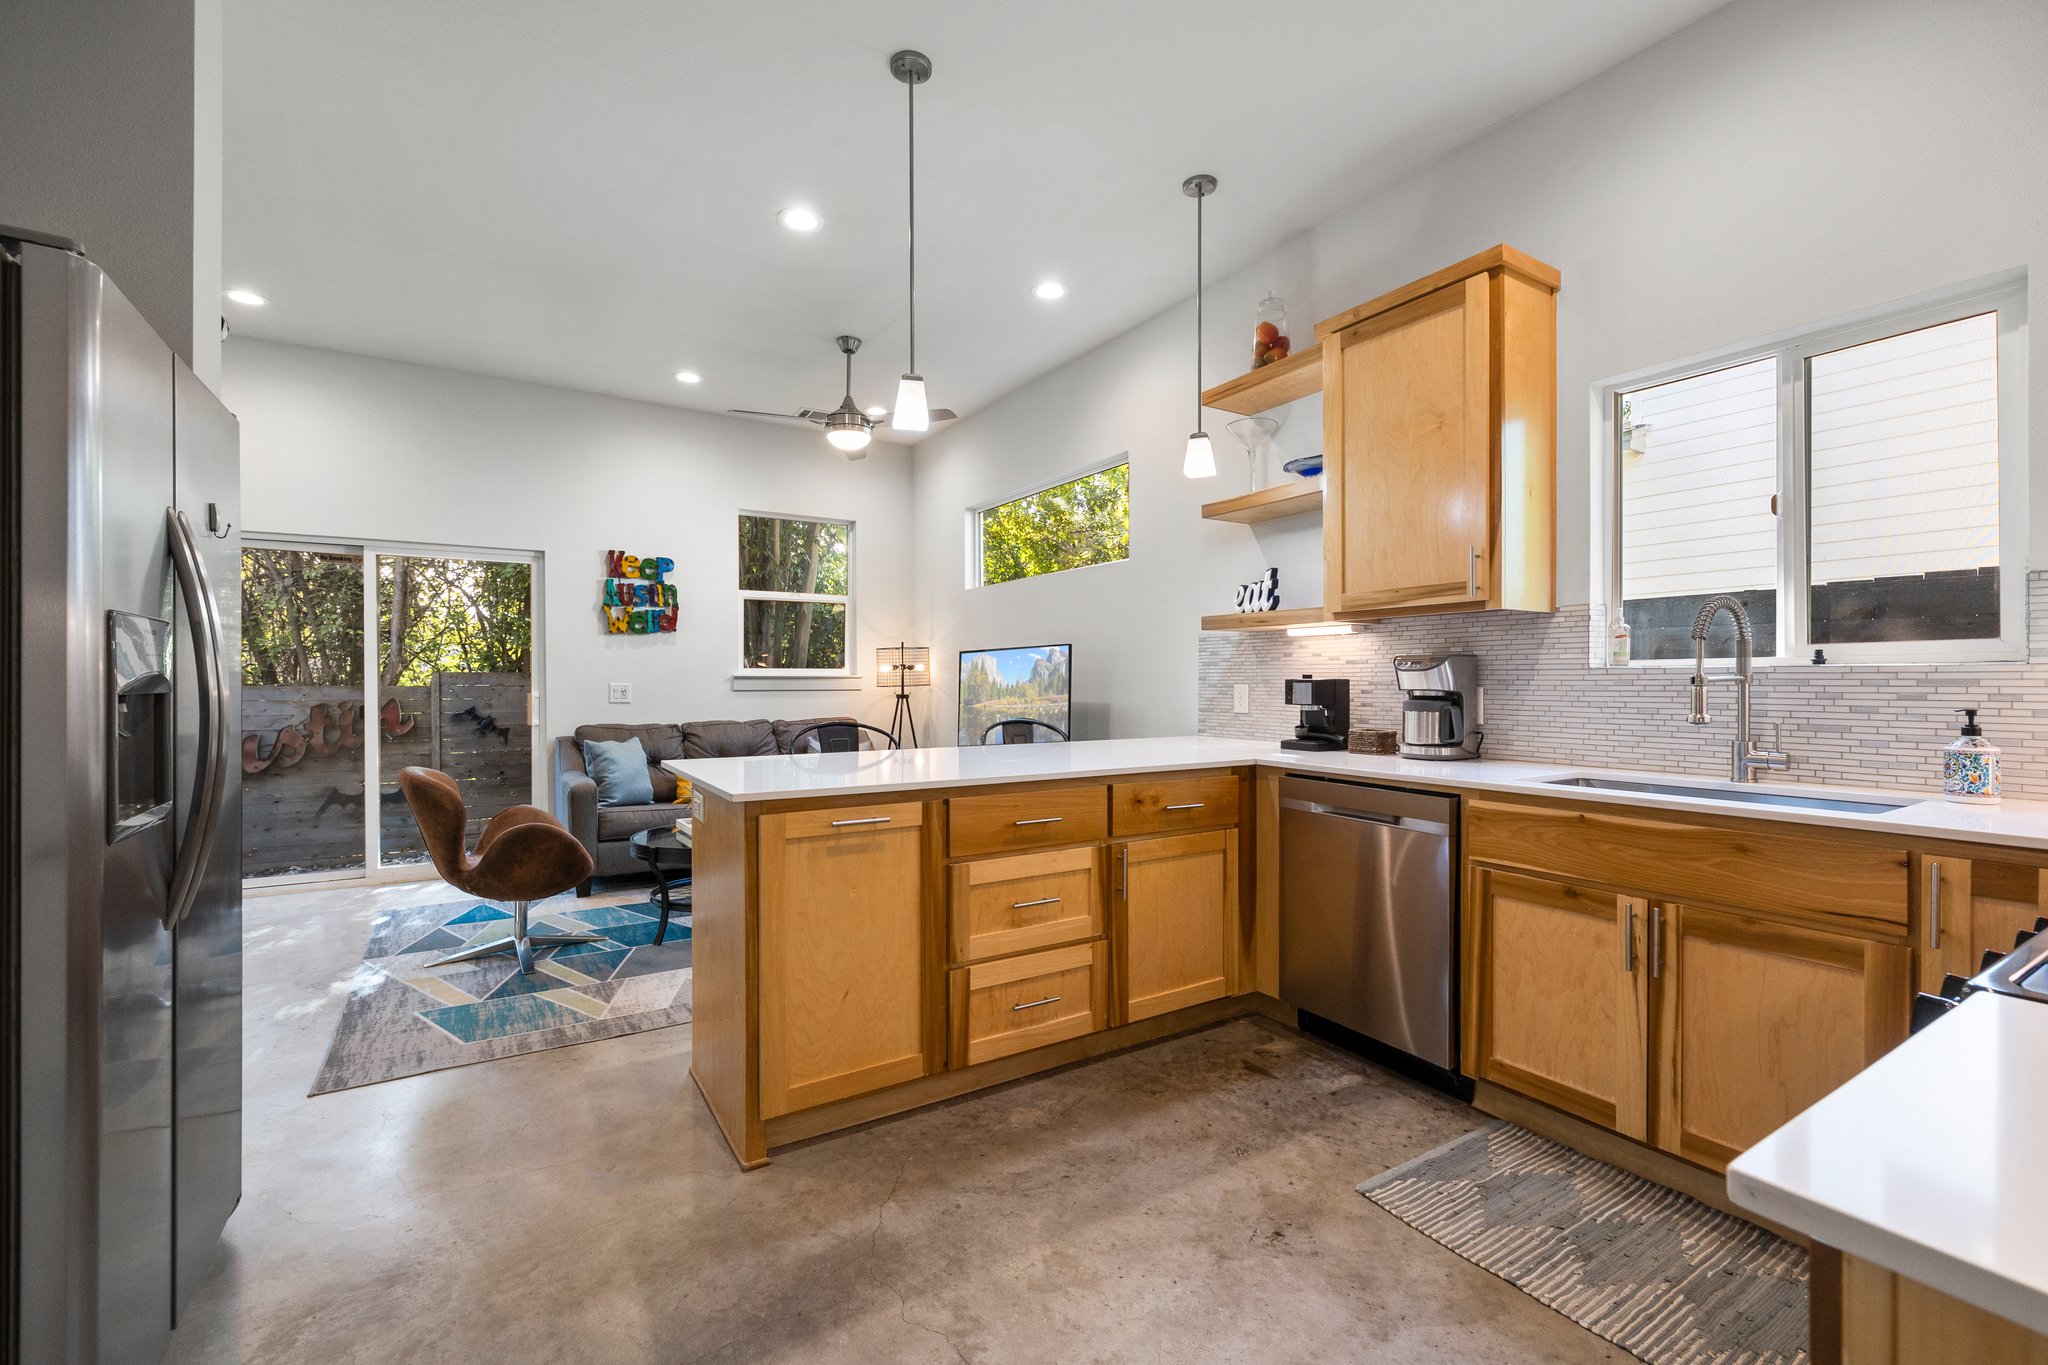 Gorgeous kitchen with maple cabinets, breakfast bar, and natural light. The "Keep Austin Weird" sign does not convey (is not included in the sale).